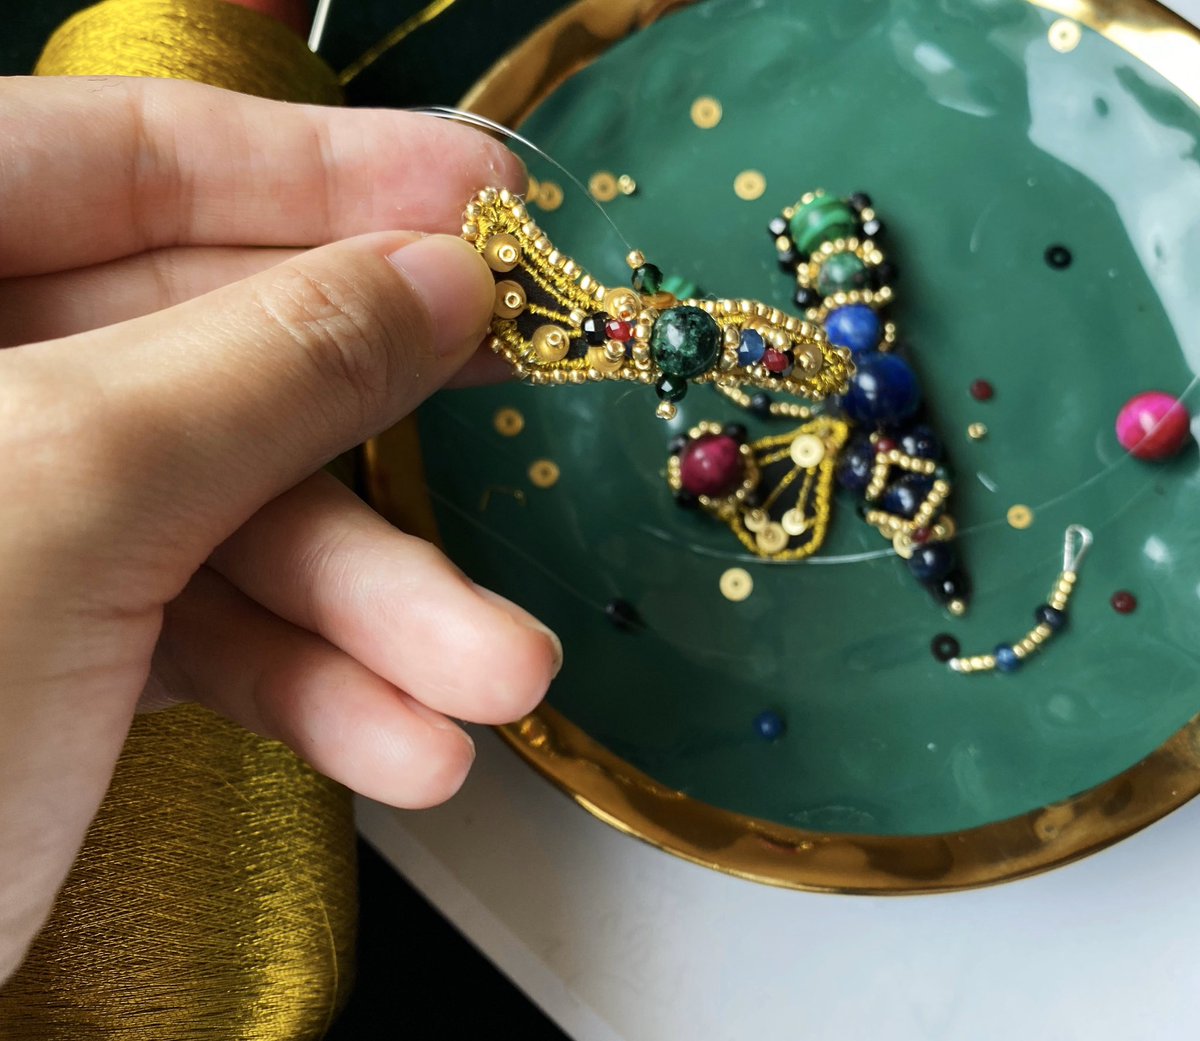 #jewelrydesign #handcraft #embroideryjewelry #hautecoutureembroidery  The designing process of the wings. Not only about the shape, but also the color combination.